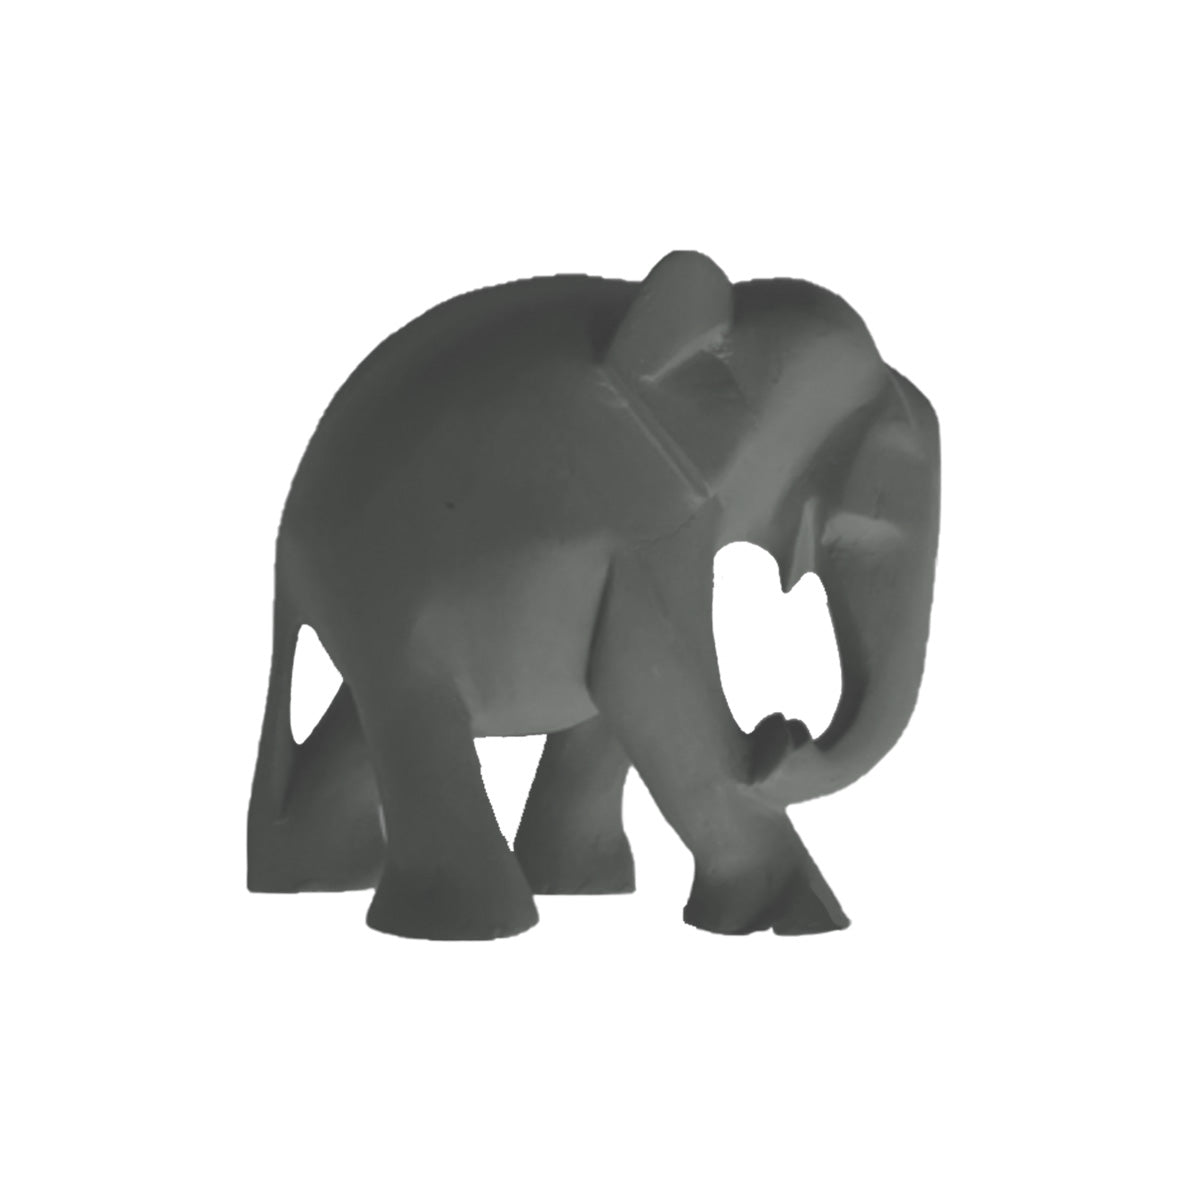 Wooden Handcarved Elephant - Anthracite